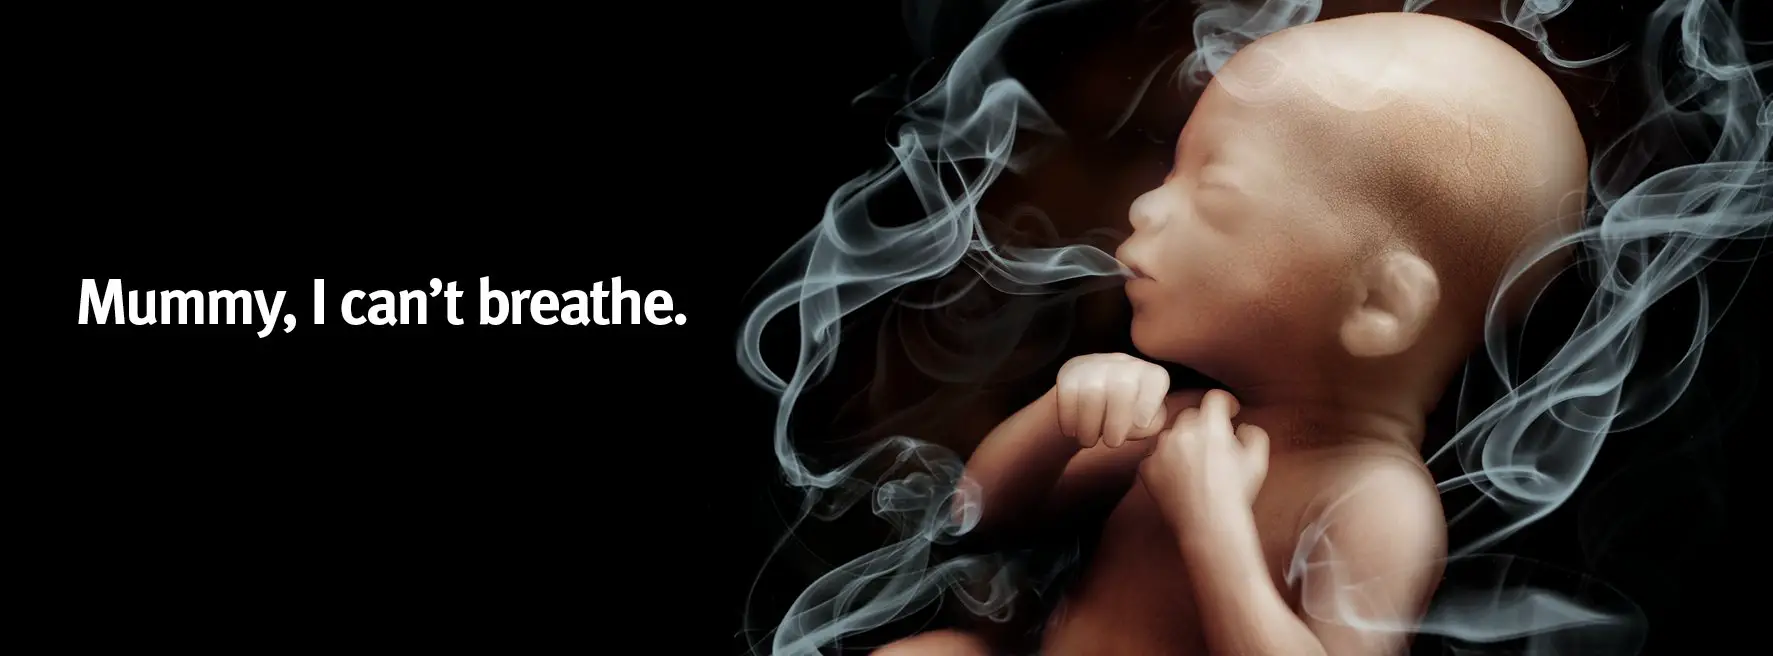 New Campaign focuses on Smoking in Pregnancy